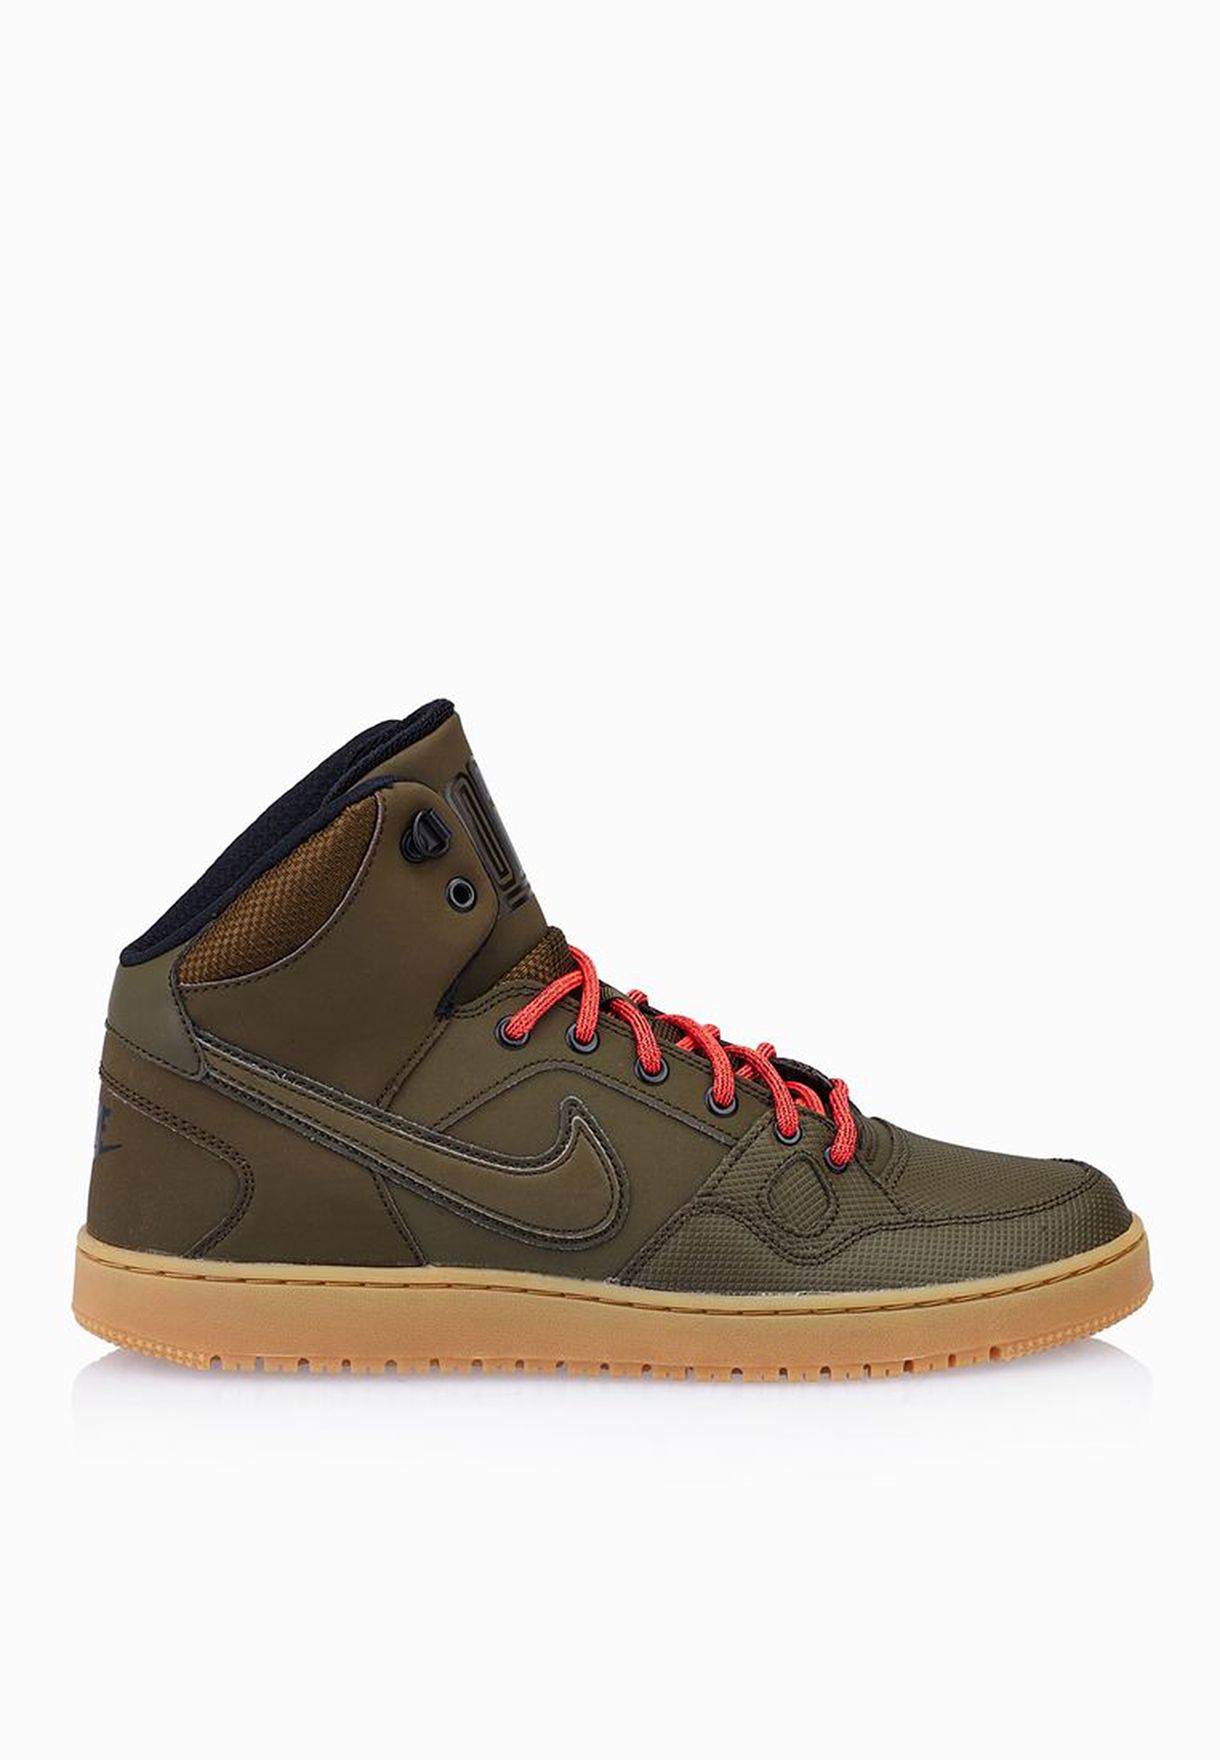 nike son force mid winter